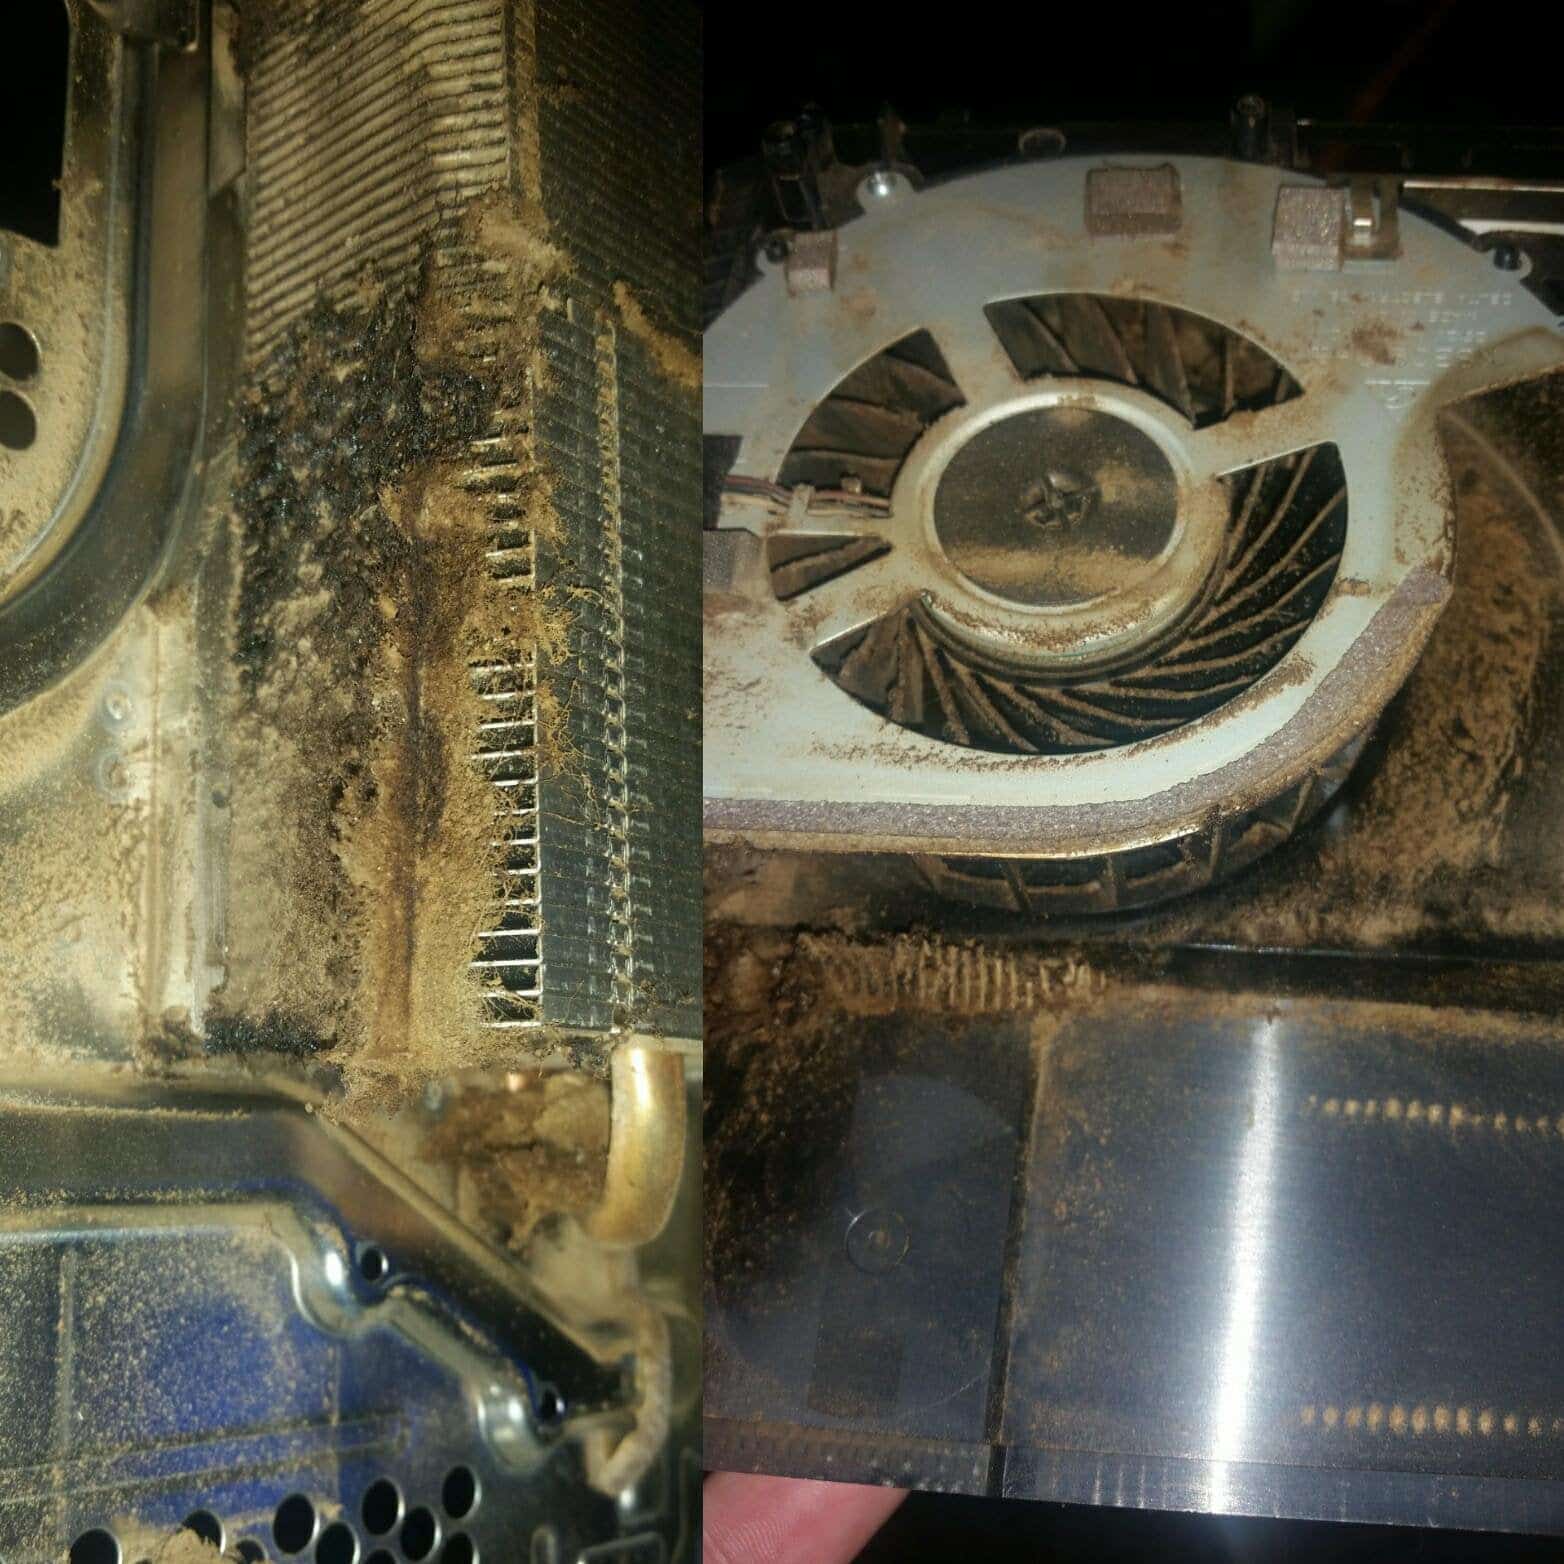 Dirtiest PS4 fan and heat sink that I